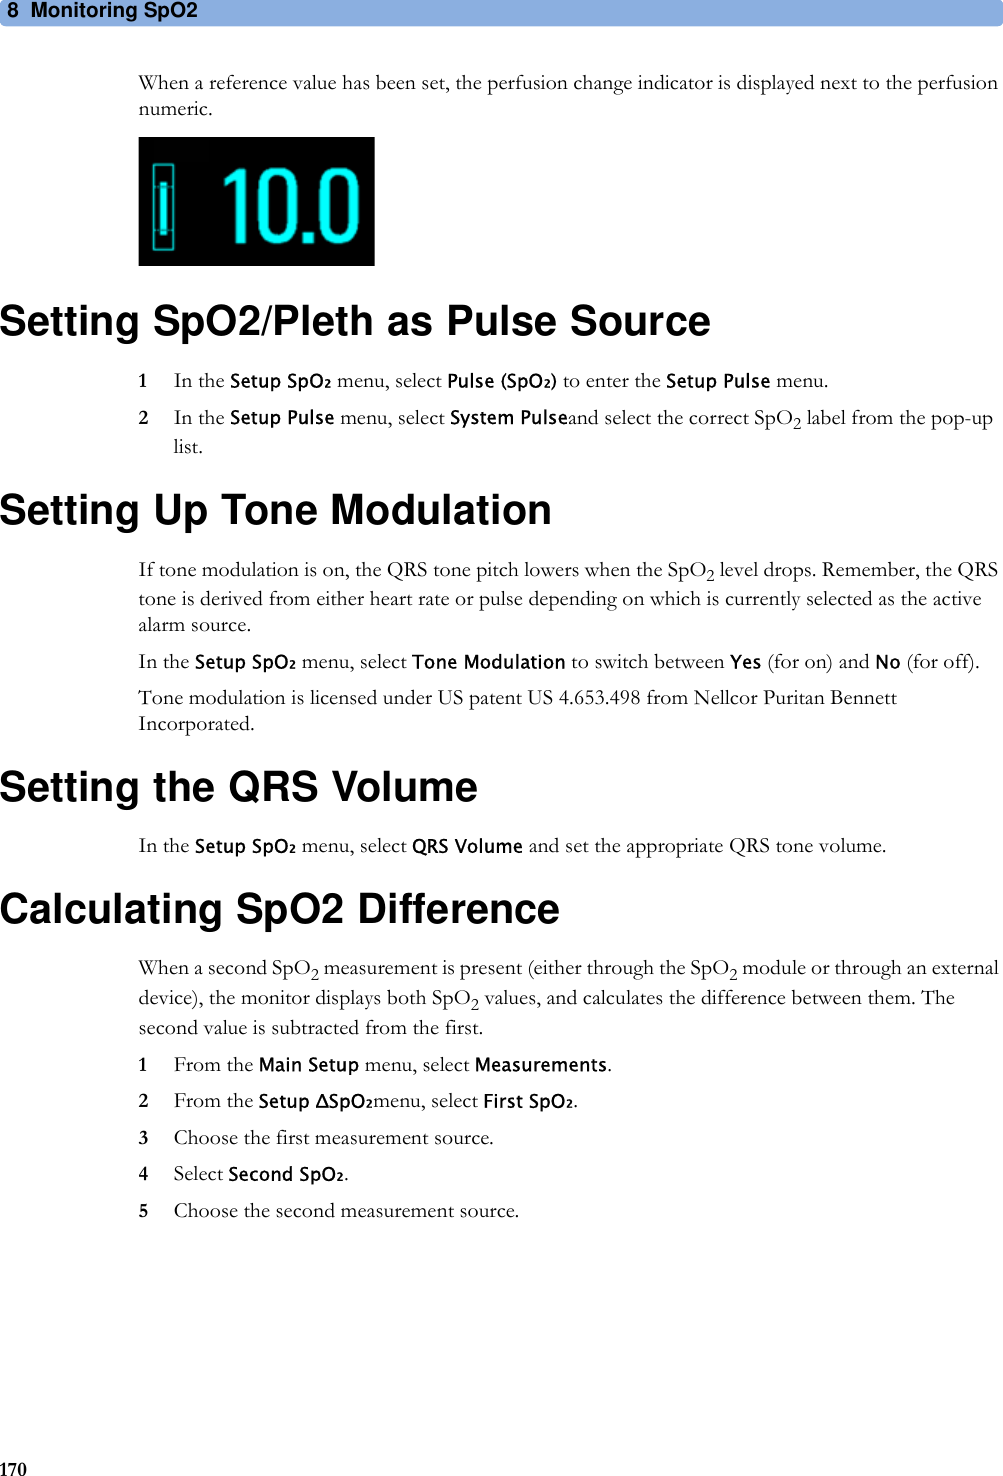 8 Monitoring SpO2170When a reference value has been set, the perfusion change indicator is displayed next to the perfusion numeric.Setting SpO2/Pleth as Pulse Source1In the Setup SpO₂ menu, select Pulse (SpO₂) to enter the Setup Pulse menu.2In the Setup Pulse menu, select System Pulseand select the correct SpO2 label from the pop-up list.Setting Up Tone ModulationIf tone modulation is on, the QRS tone pitch lowers when the SpO2 level drops. Remember, the QRS tone is derived from either heart rate or pulse depending on which is currently selected as the active alarm source.In the Setup SpO₂ menu, select Tone Modulation to switch between Yes (for on) and No (for off).Tone modulation is licensed under US patent US 4.653.498 from Nellcor Puritan Bennett Incorporated.Setting the QRS VolumeIn the Setup SpO₂ menu, select QRS Volume and set the appropriate QRS tone volume.Calculating SpO2 DifferenceWhen a second SpO2 measurement is present (either through the SpO2 module or through an external device), the monitor displays both SpO2 values, and calculates the difference between them. The second value is subtracted from the first.1From the Main Setup menu, select Measurements.2From the Setup ΔSpO₂menu, select First SpO₂.3Choose the first measurement source.4Select Second SpO₂.5Choose the second measurement source.